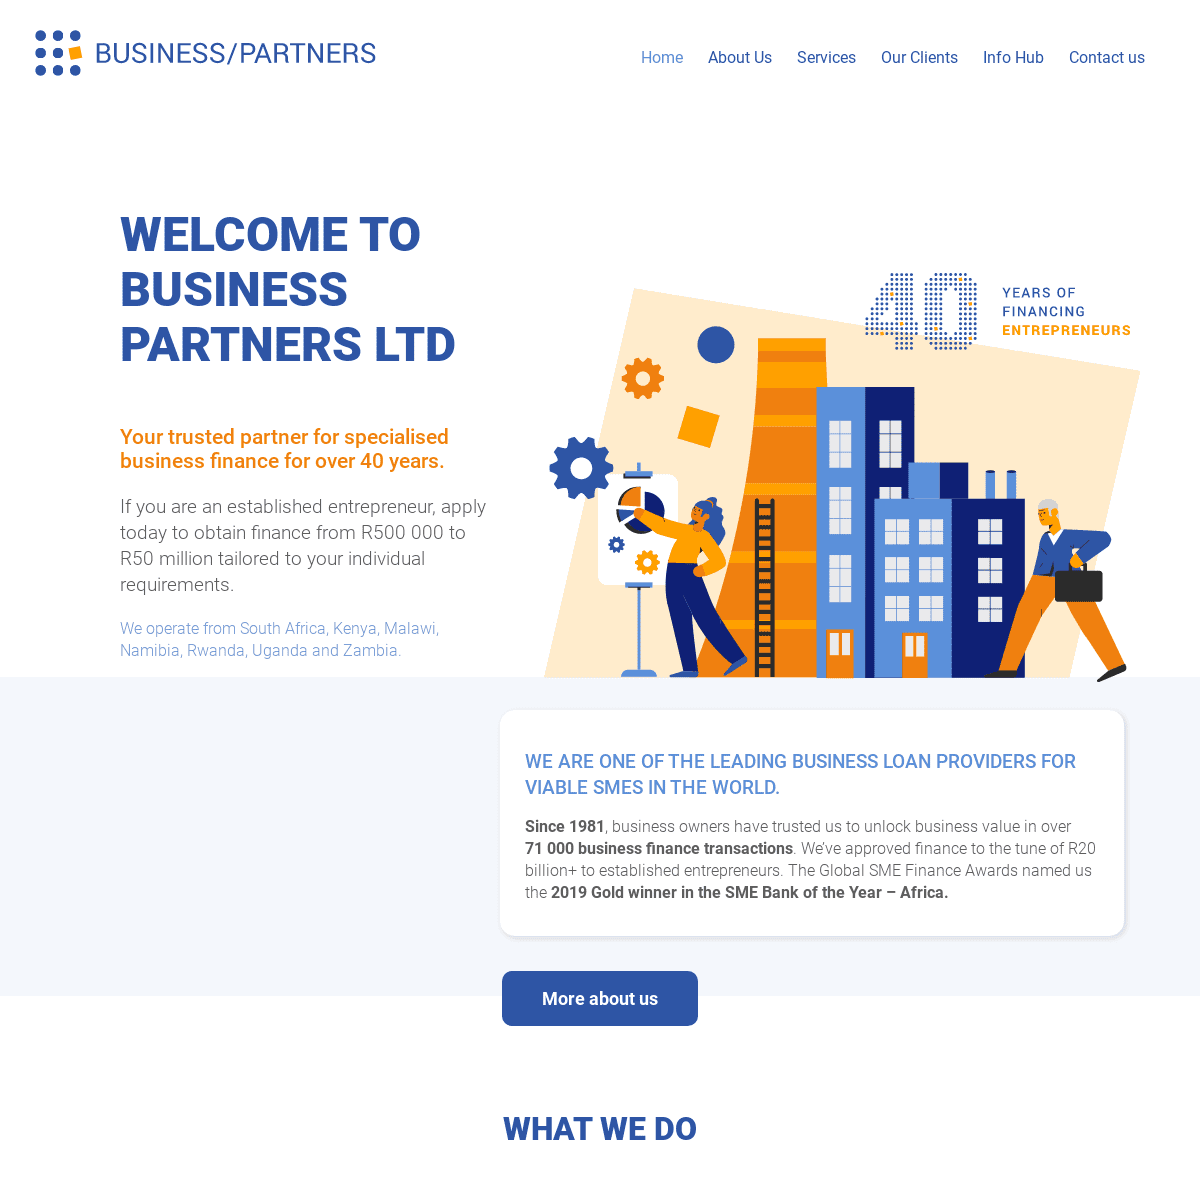 A complete backup of https://businesspartners.co.za